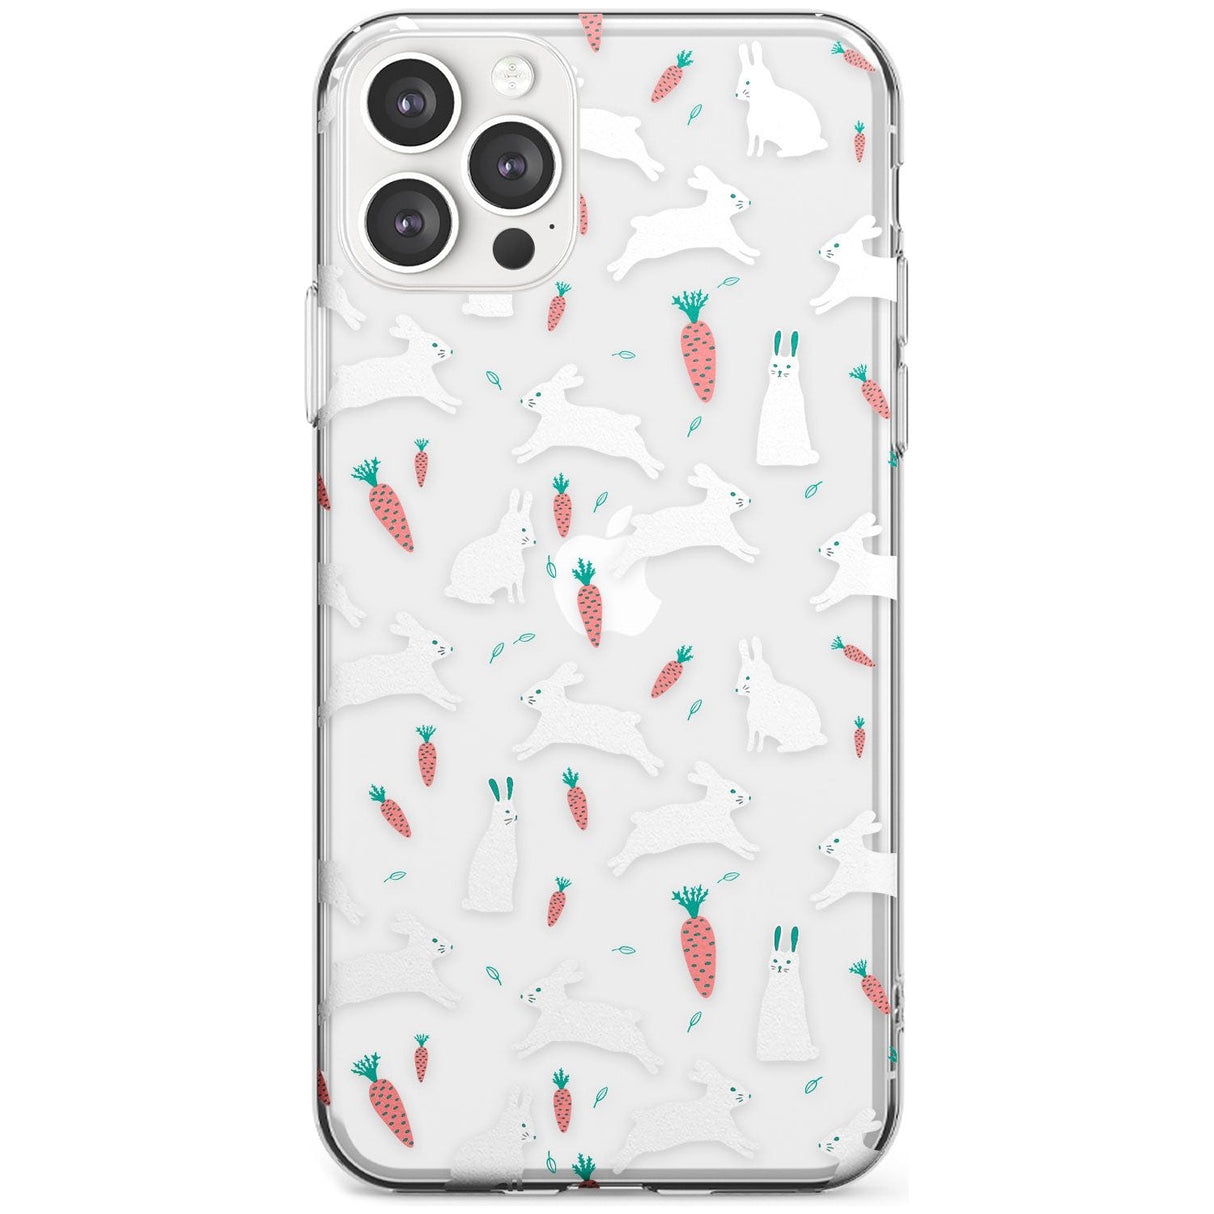 White Bunnies and Carrots Slim TPU Phone Case for iPhone 11 Pro Max